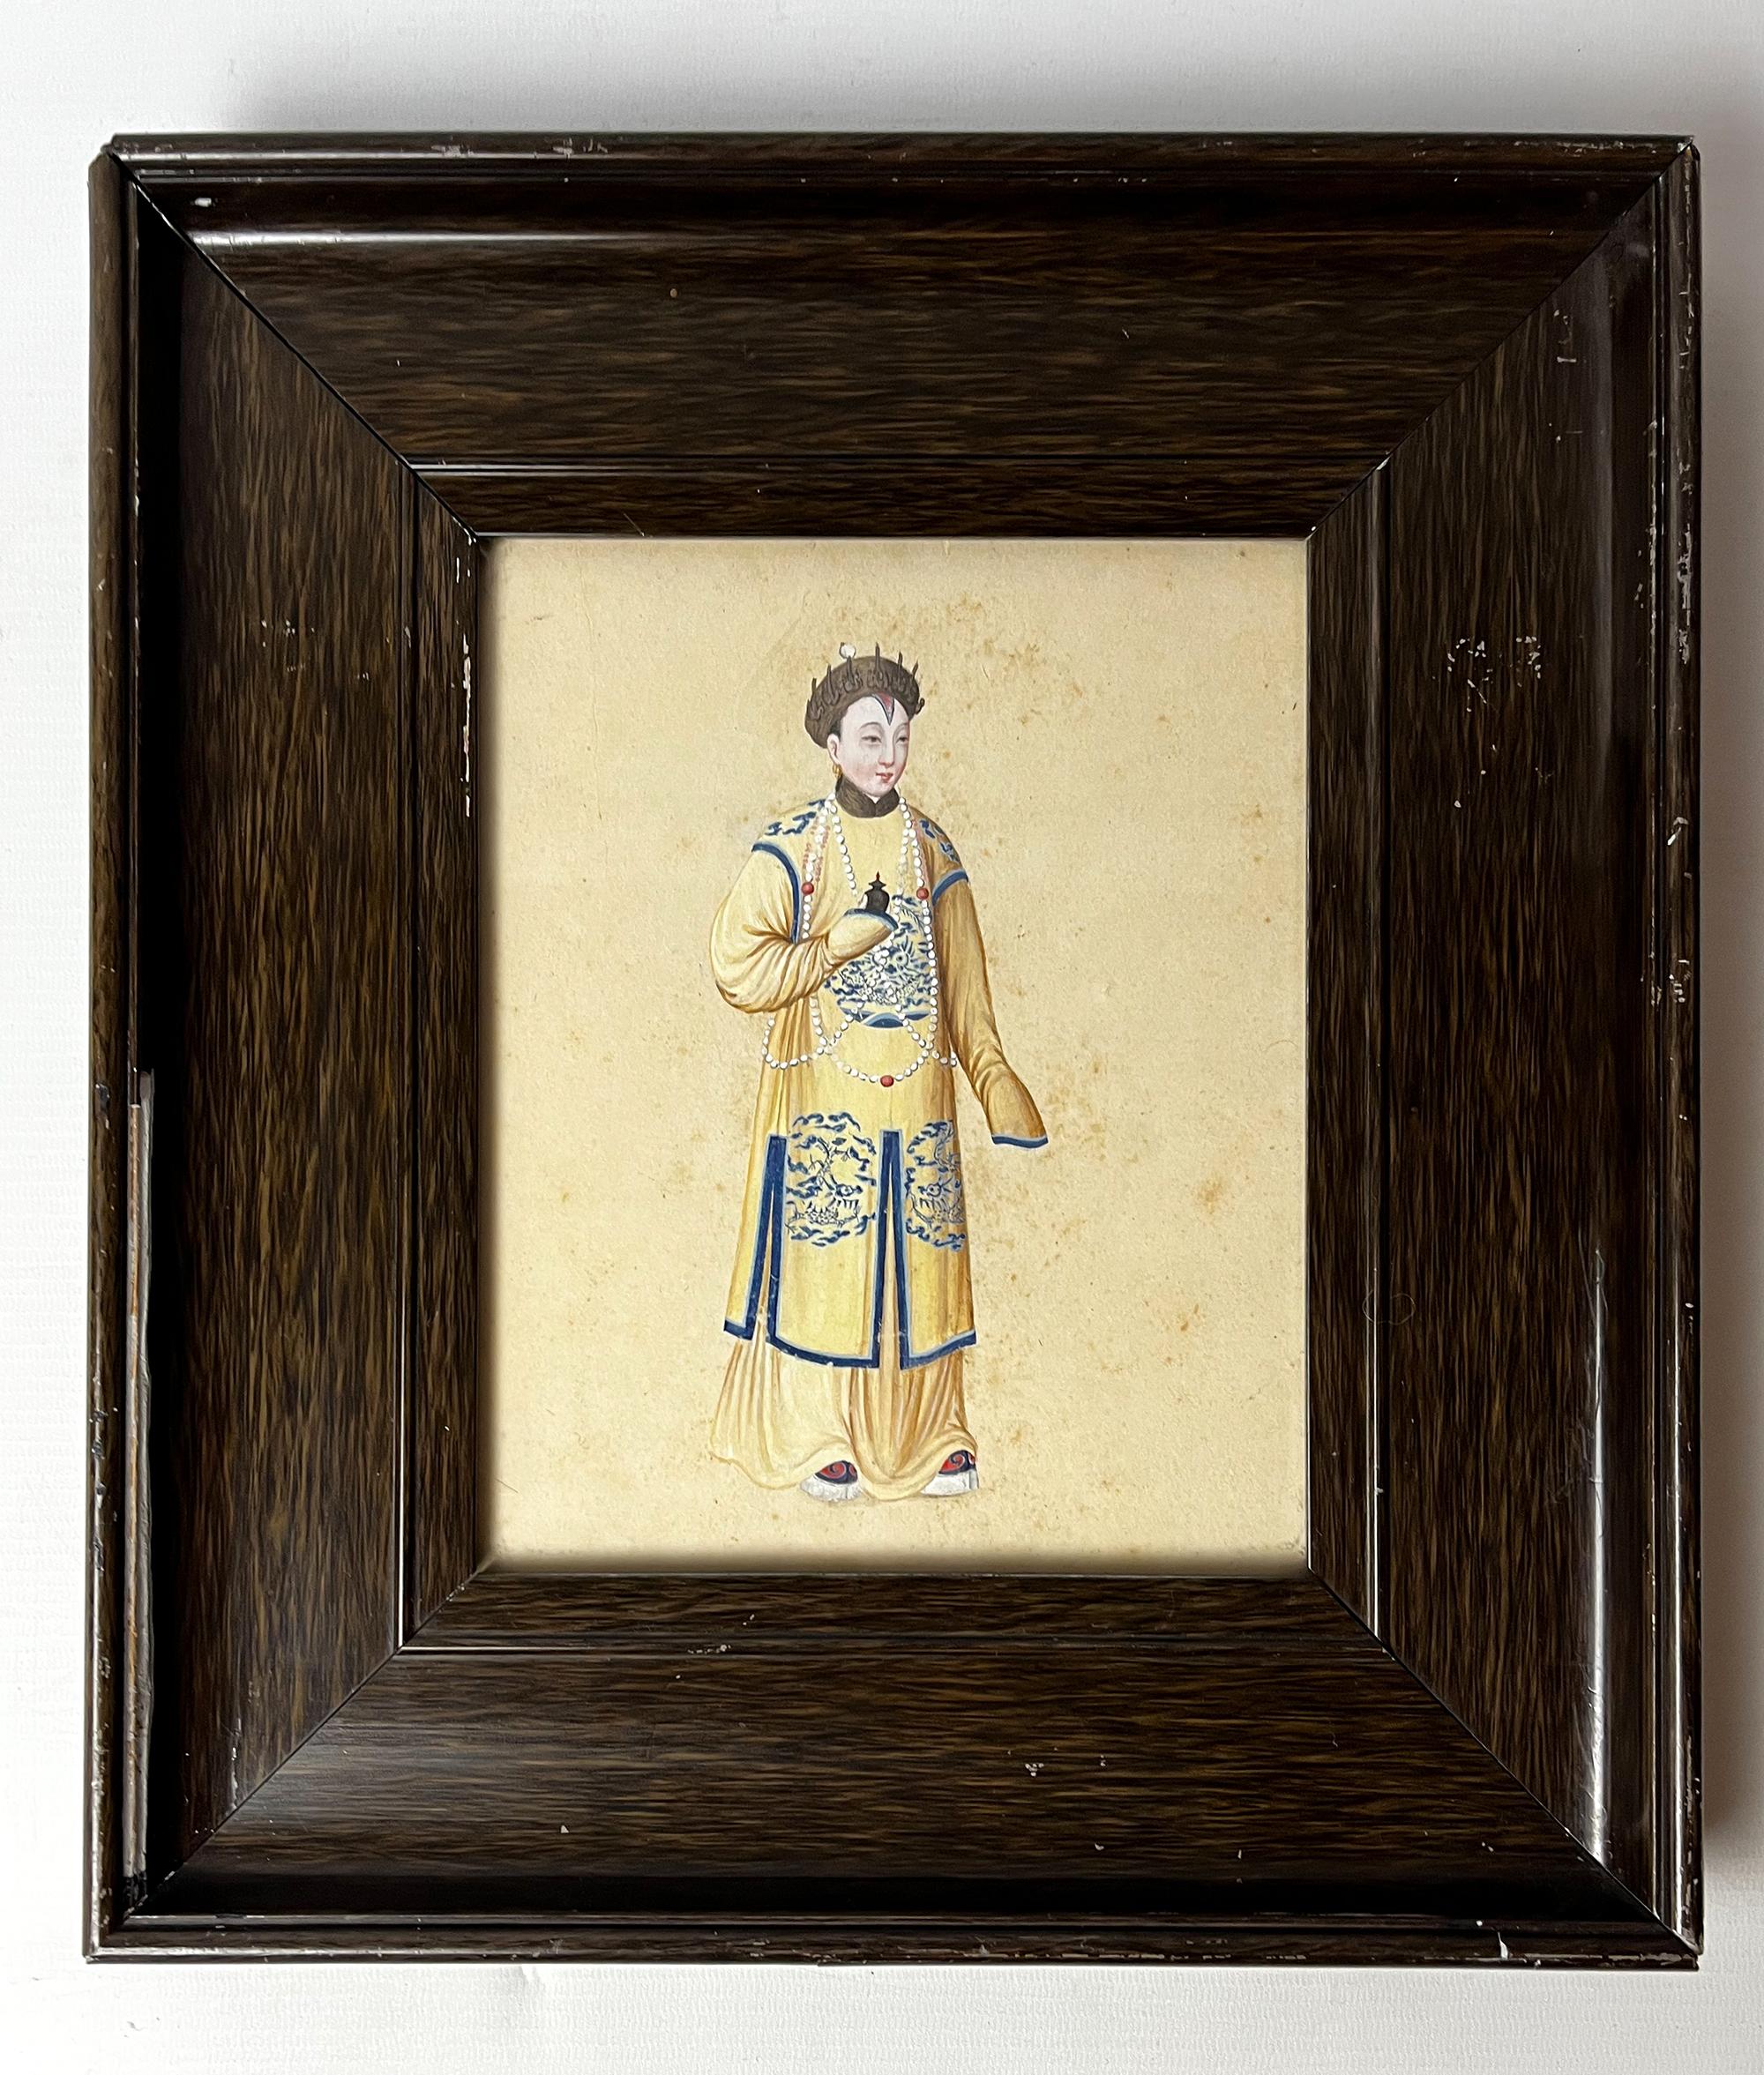 Two Chinese paintings of figures in court dress

19th century, opaque pigments on paper, each depicting a figure wearing robes decorated with dragon motifs on yellow-grounds.

Produced in the 19th century for export to Europe, through the great